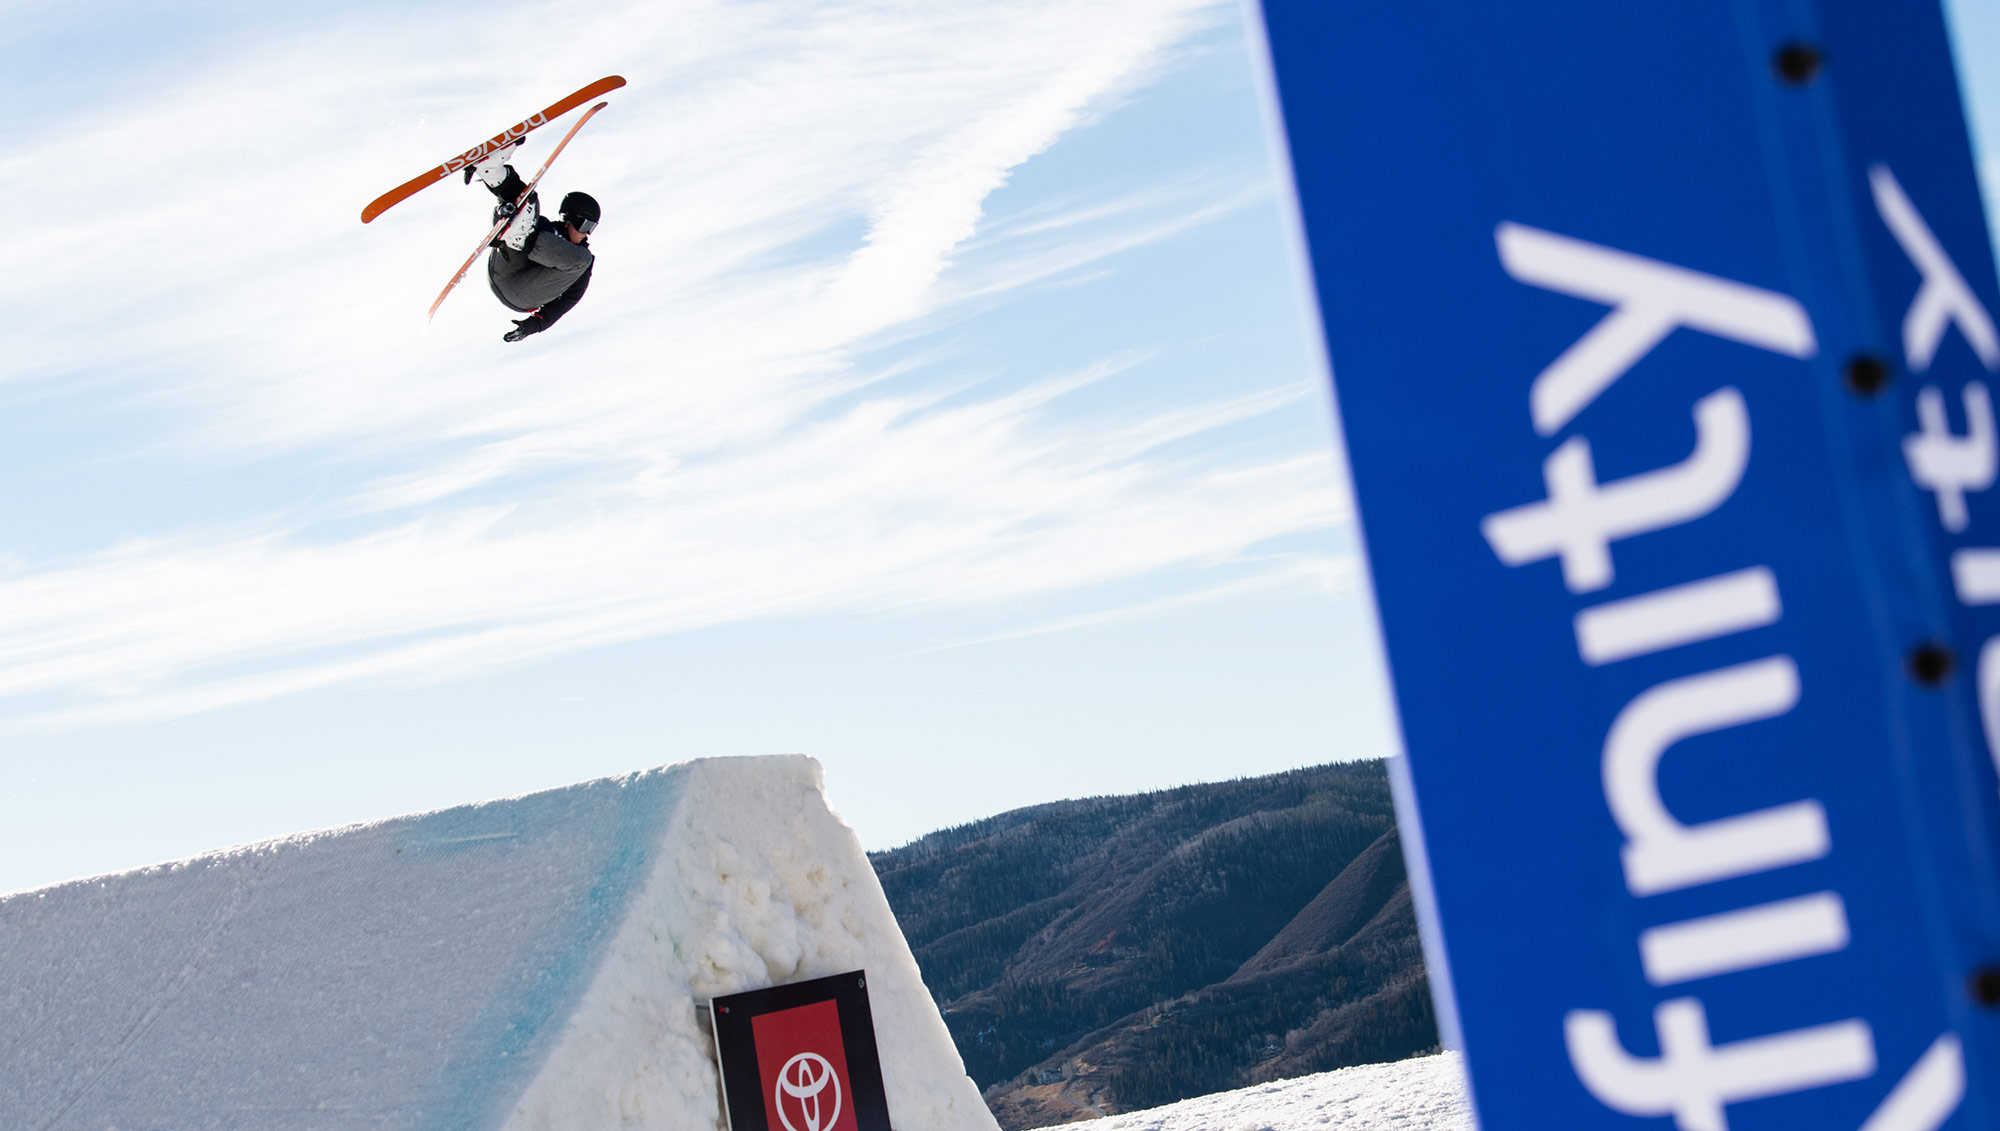 Jay Riccomini competes in qualifiers at the 2021 Visa Big Air in Steamboat, Colorado.